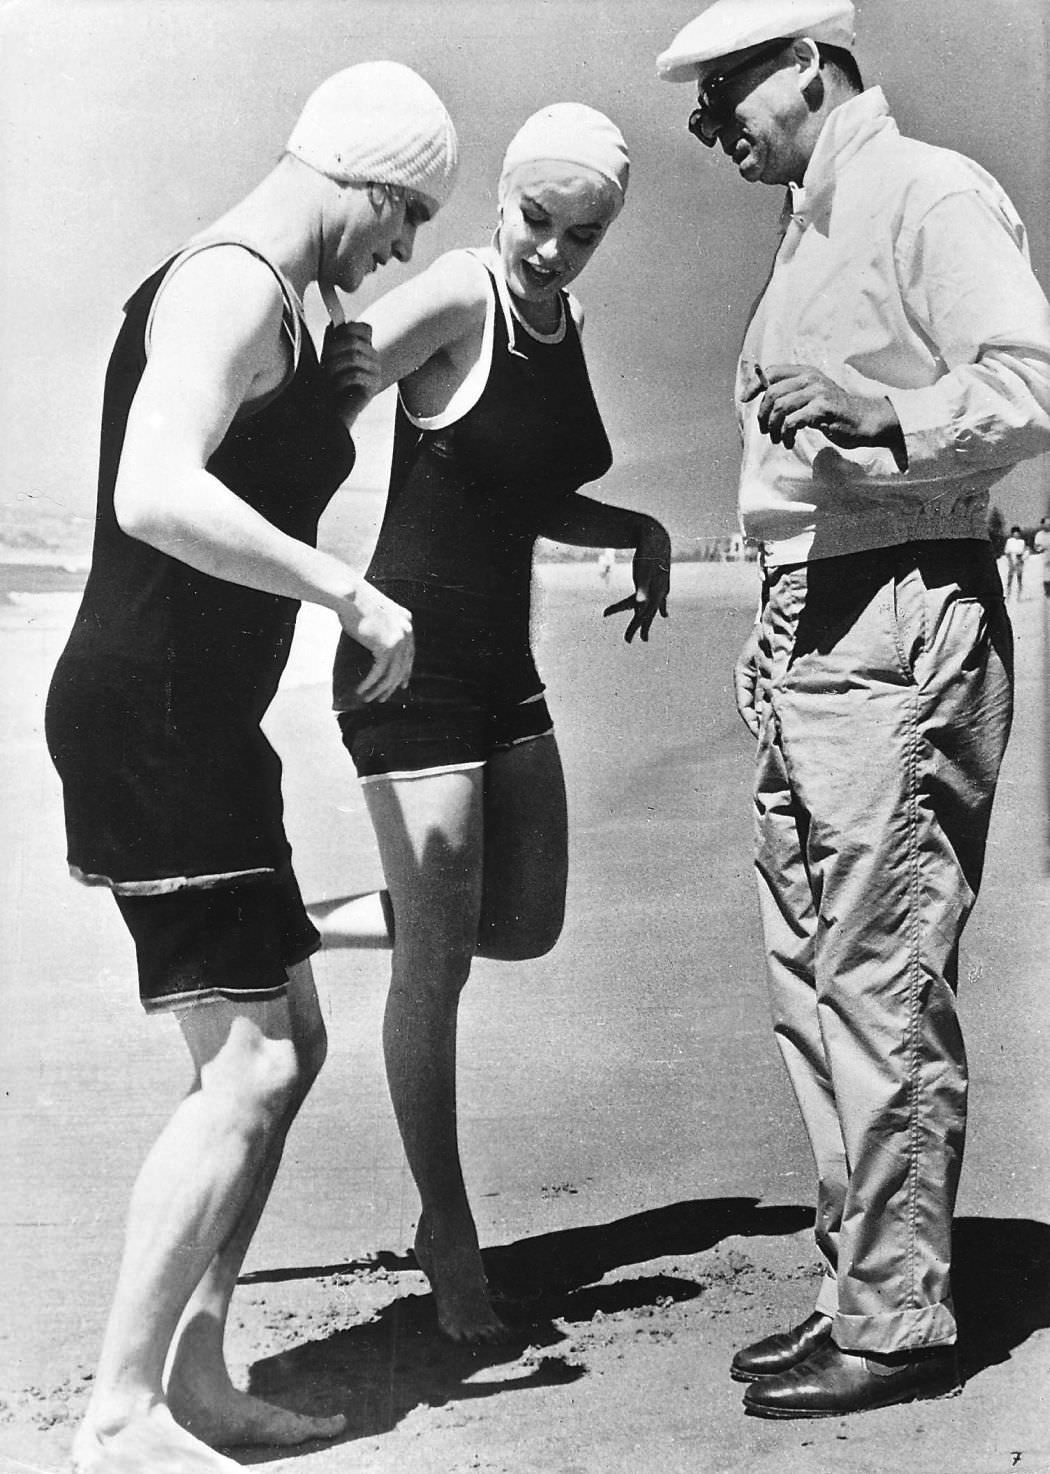 Jack Lemmon, Marilyn Monroe and director Billy Wilder prepare for a scene in Some Like It Hot in 1959.